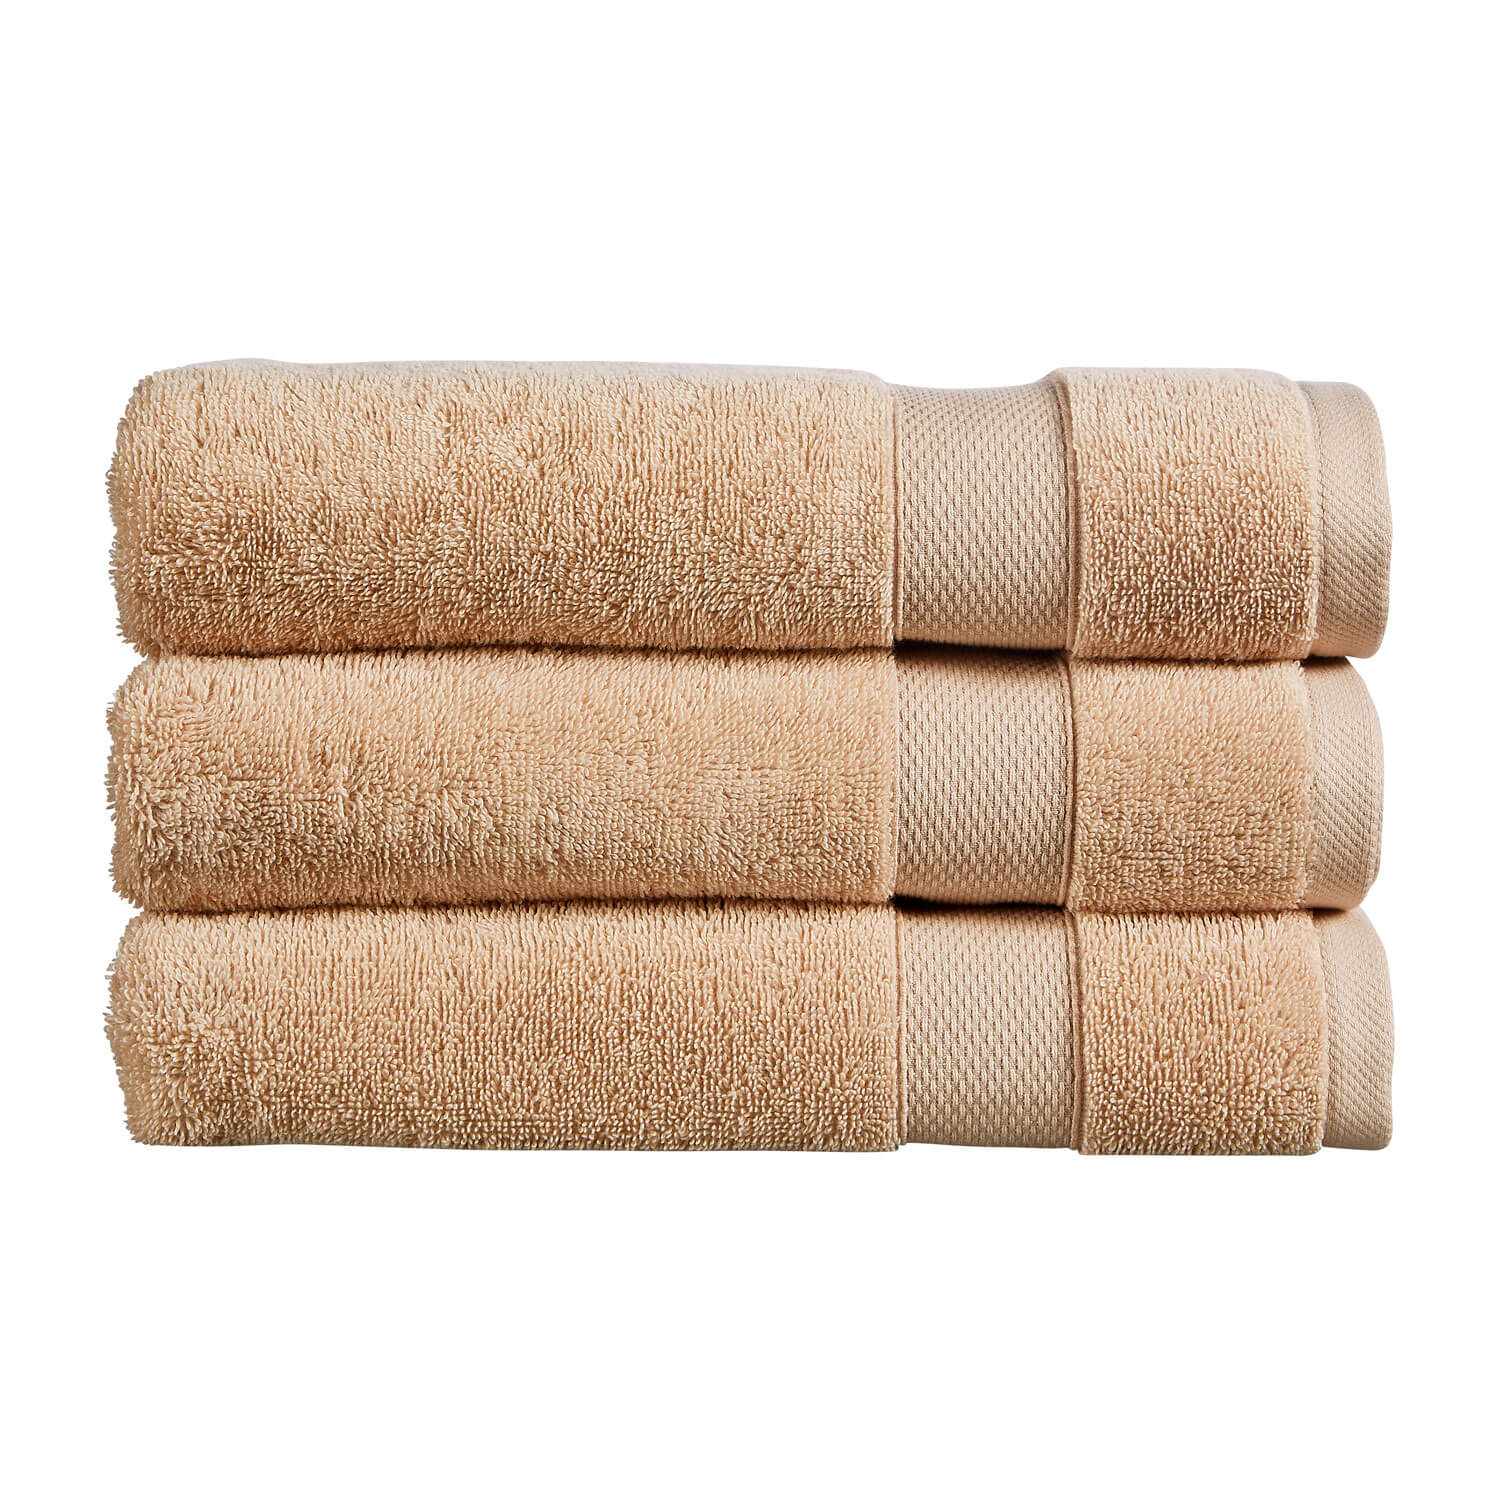 Christy Refresh Towels - Chai Latte 1 Shaws Department Stores